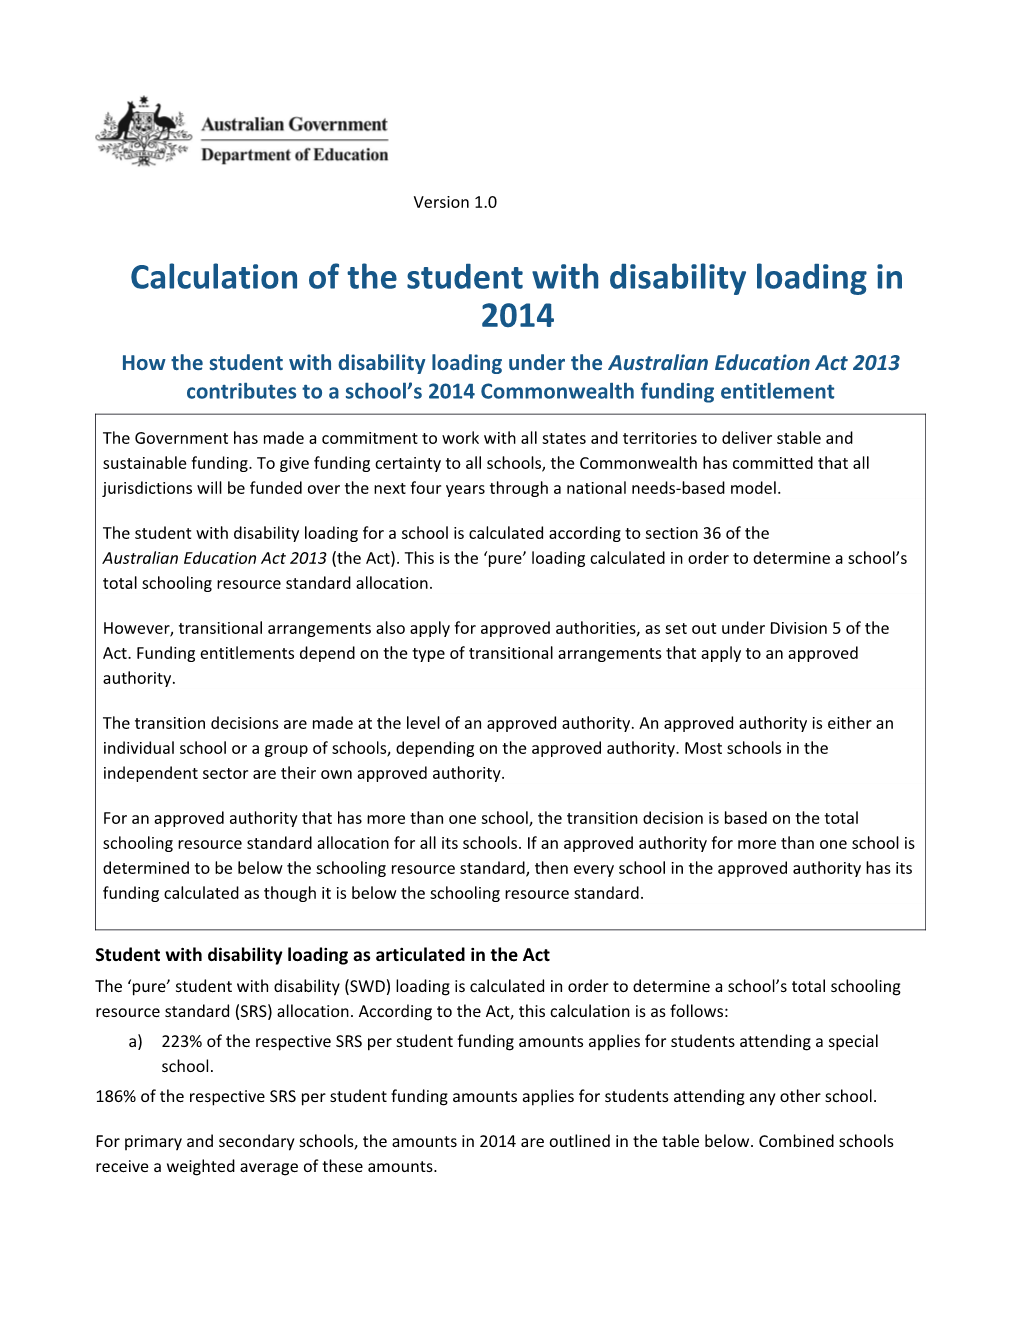 Calculation of the Student with Disability Loadingin 2014